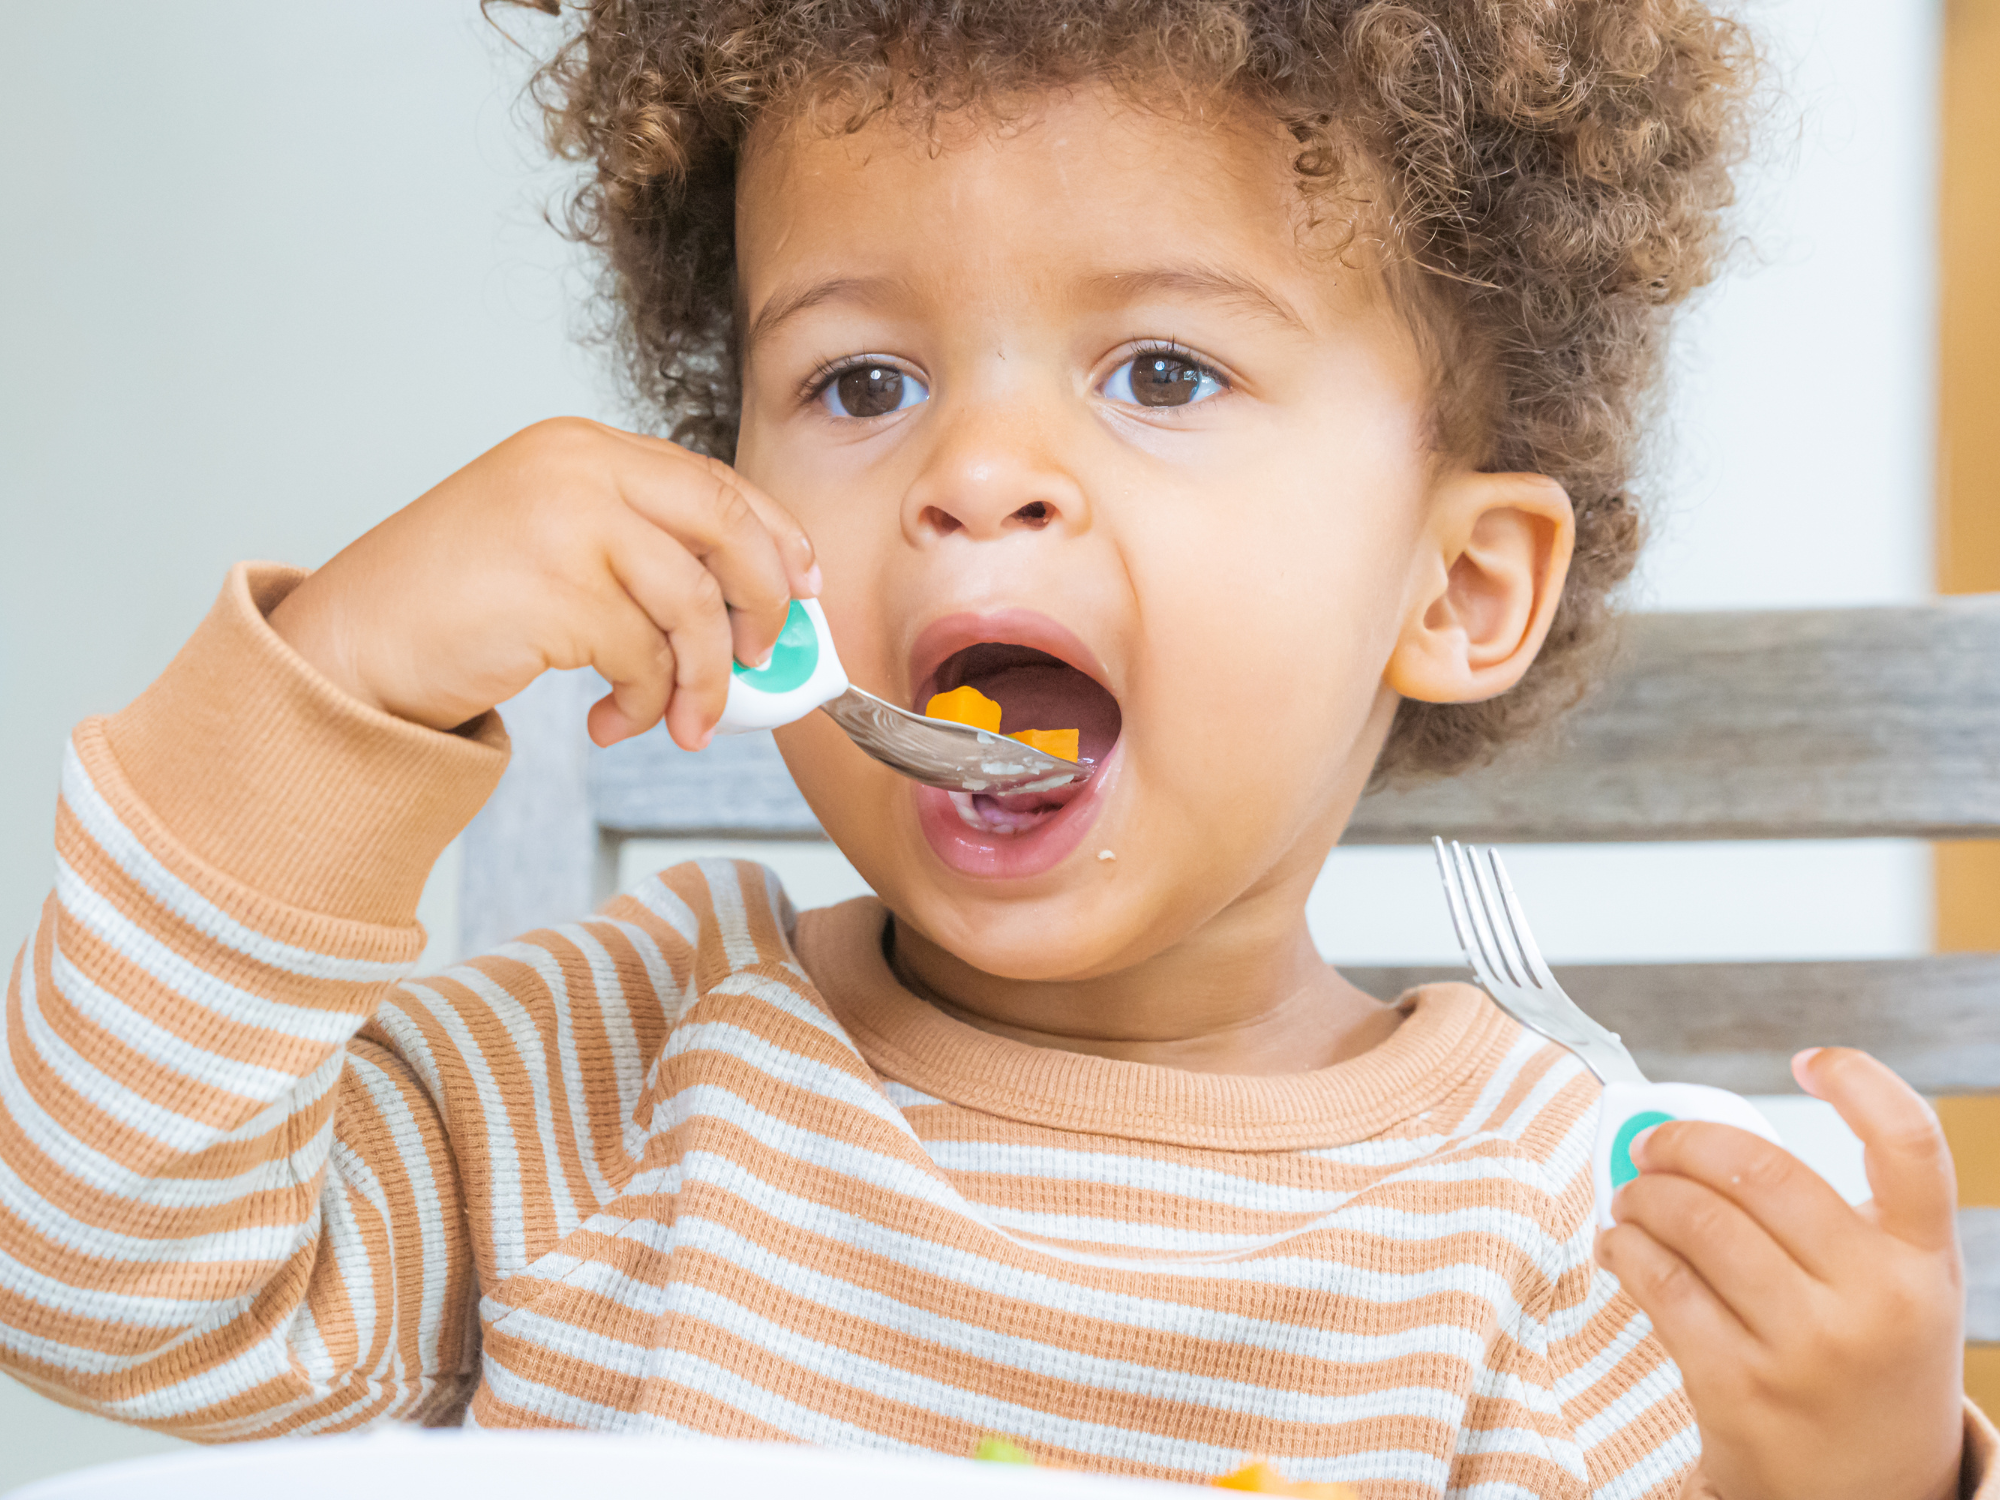 introducing doddl toddler cutlery. a toddler boy in a stripy t-shirt uses a doddl spoon to spoon food into his mouth